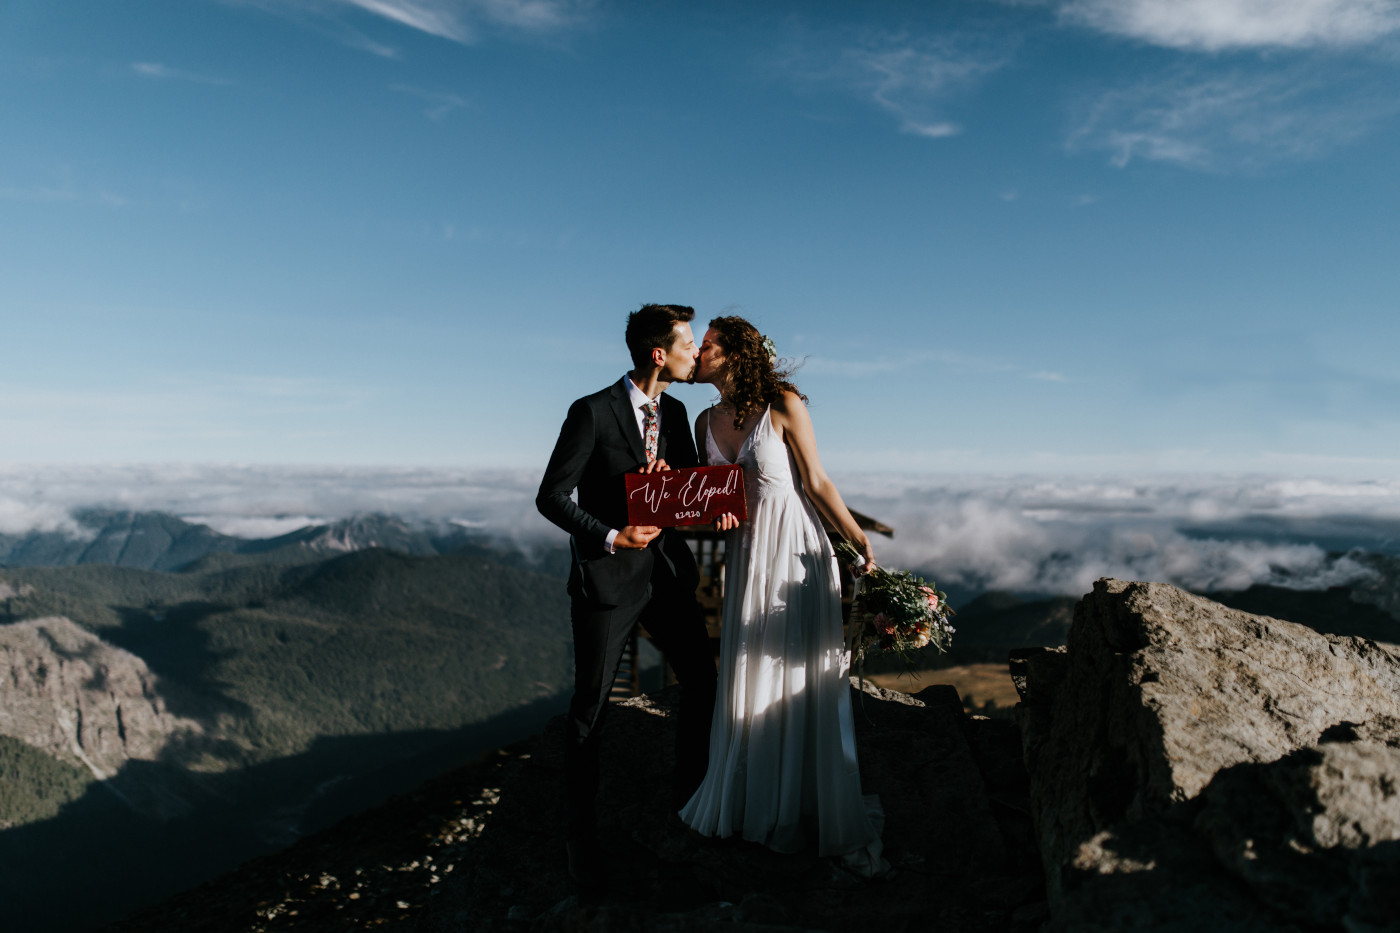 Tasha and Chad kiss while holding their sign. Elopement photography at Mount Rainier by Sienna Plus Josh.